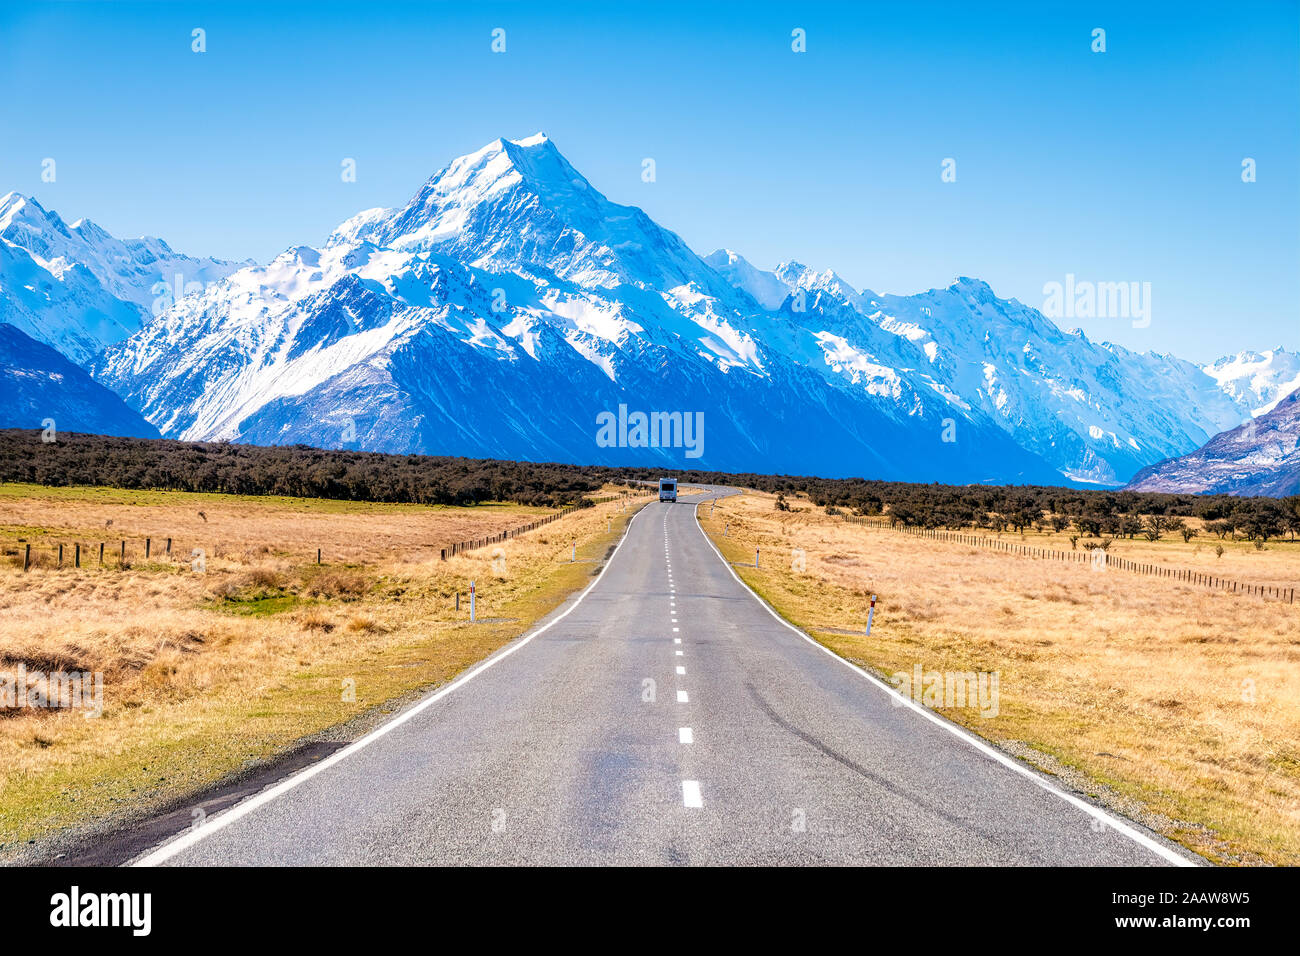 New Zealand, South Island, Diminishing perspective of Starlight Highway towards snowcapped mountains Stock Photo